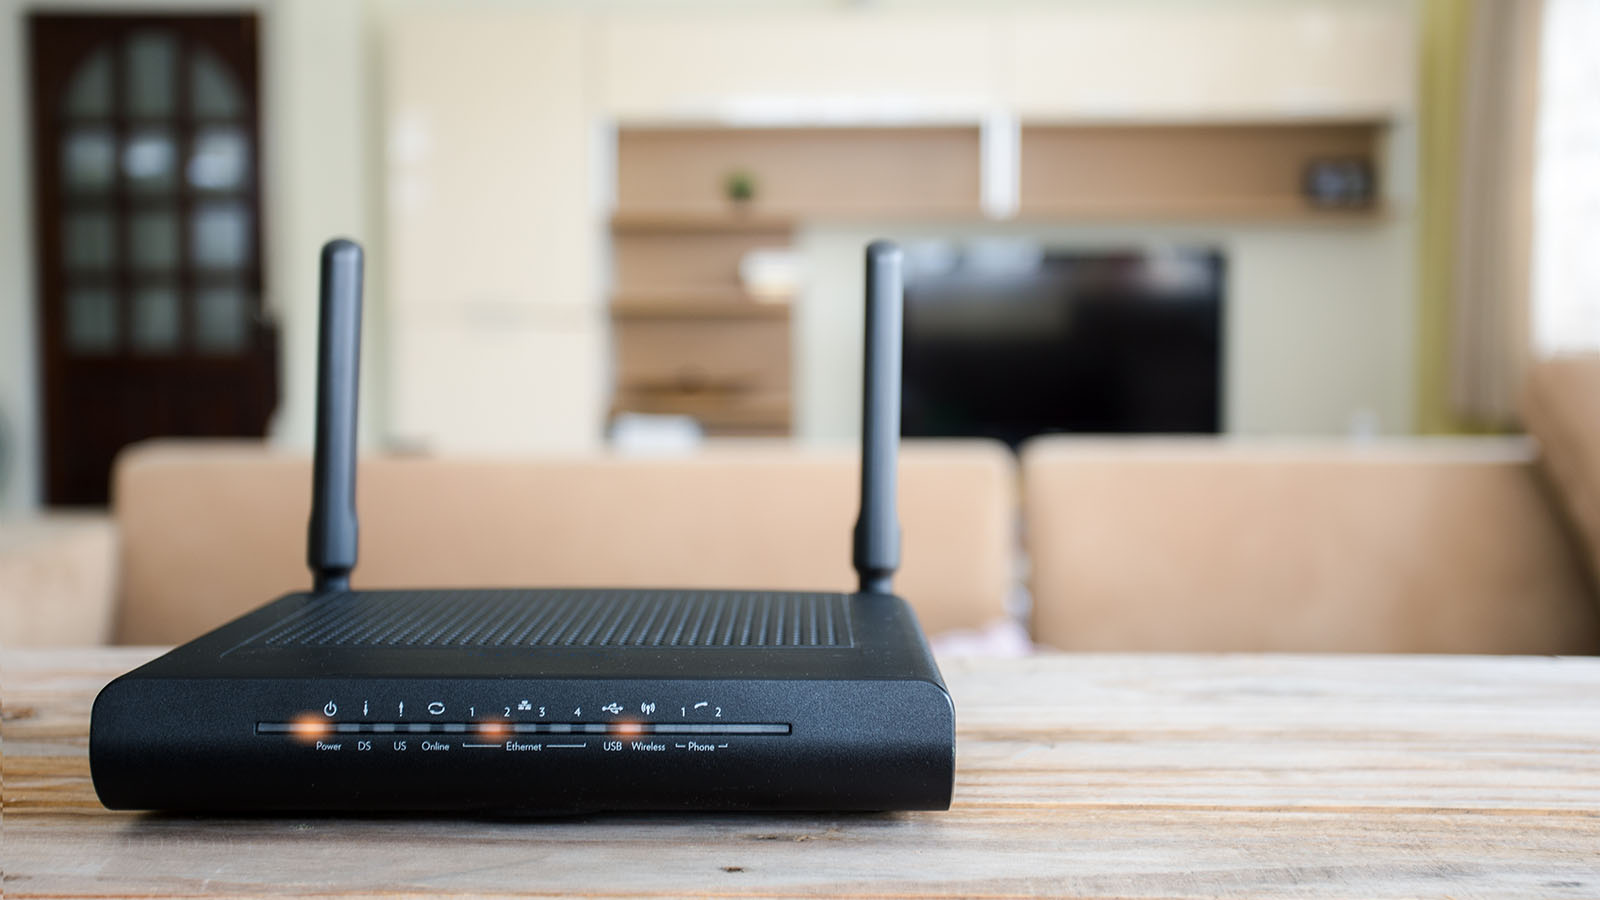 5 Things to Consider Before Buying a Wireless Router